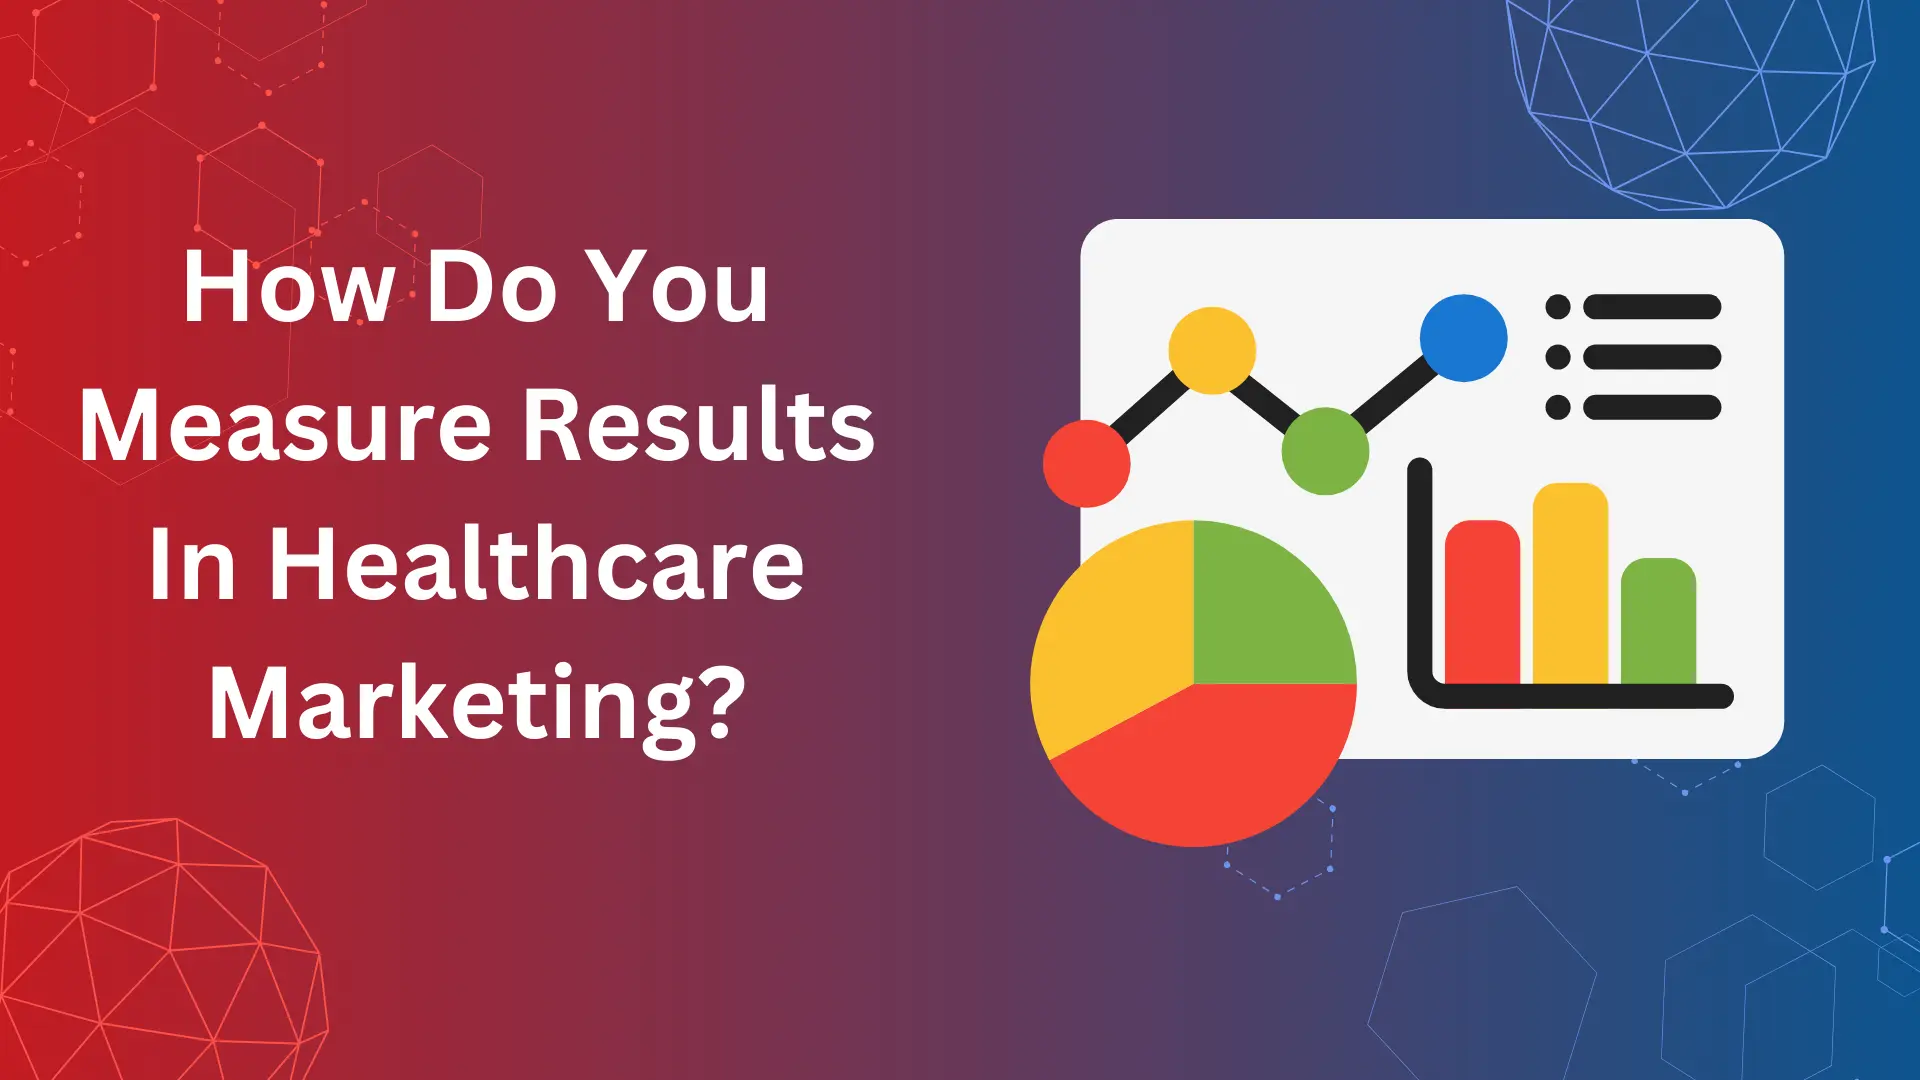 How do you measure results in healthcare marketing